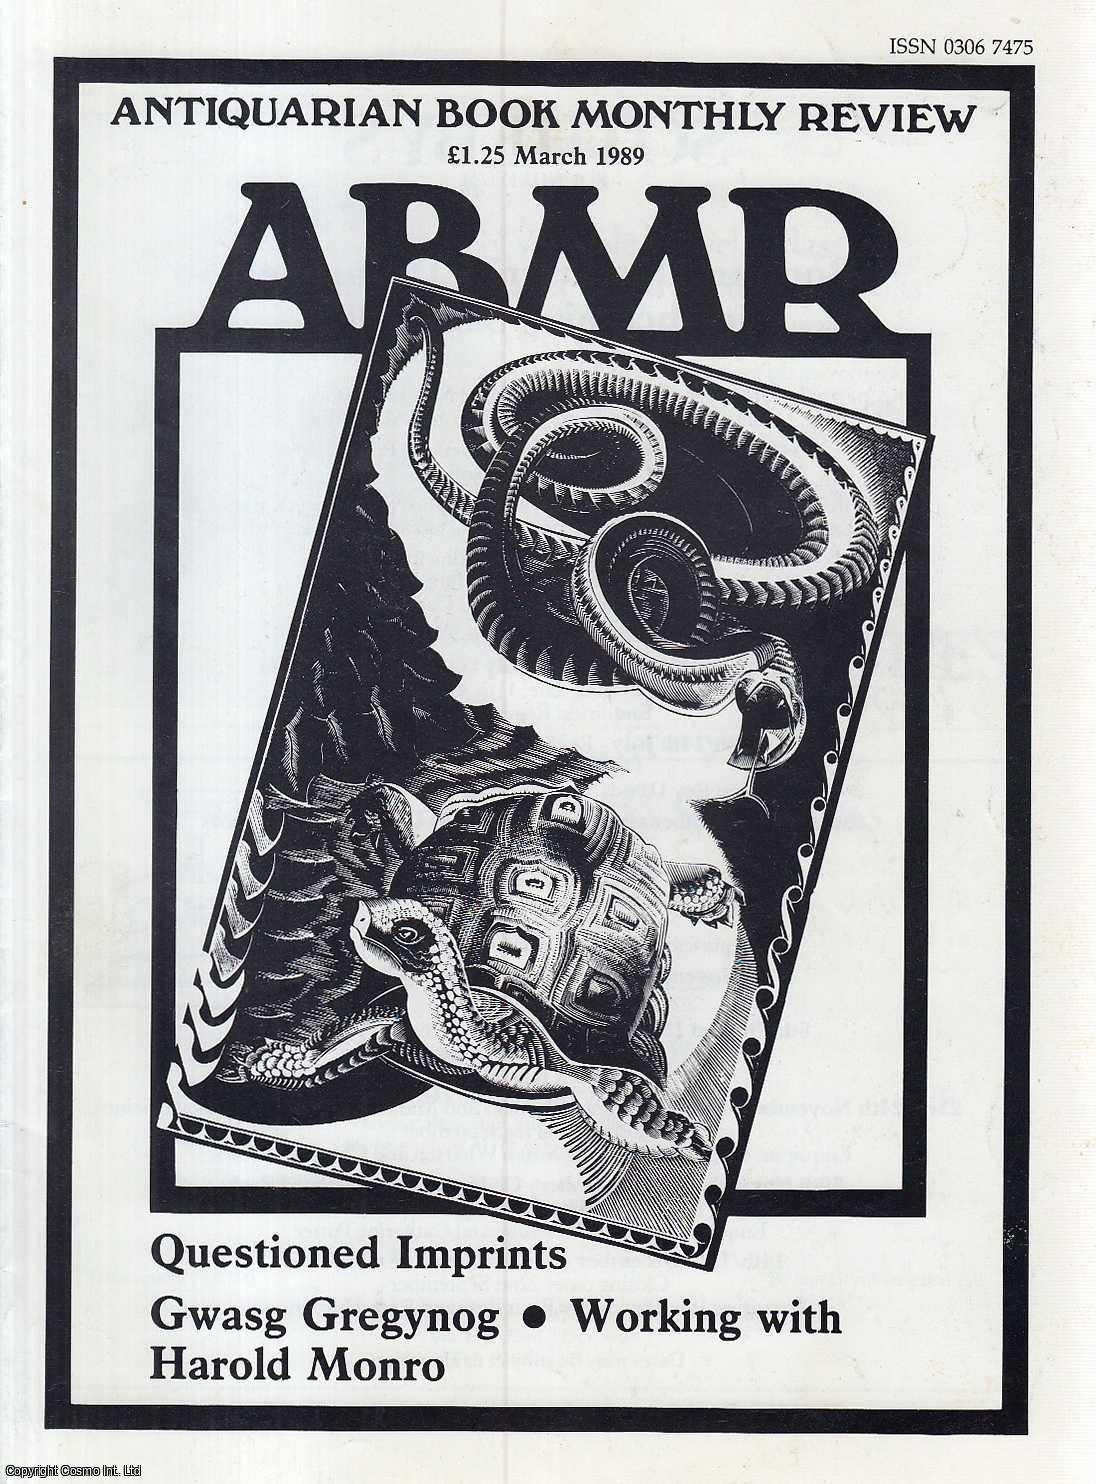 ABMR - Questioned Imprints in the United States. An original article contained in a complete monthly issue of the Antiquarian Book Monthly Review, 1989.